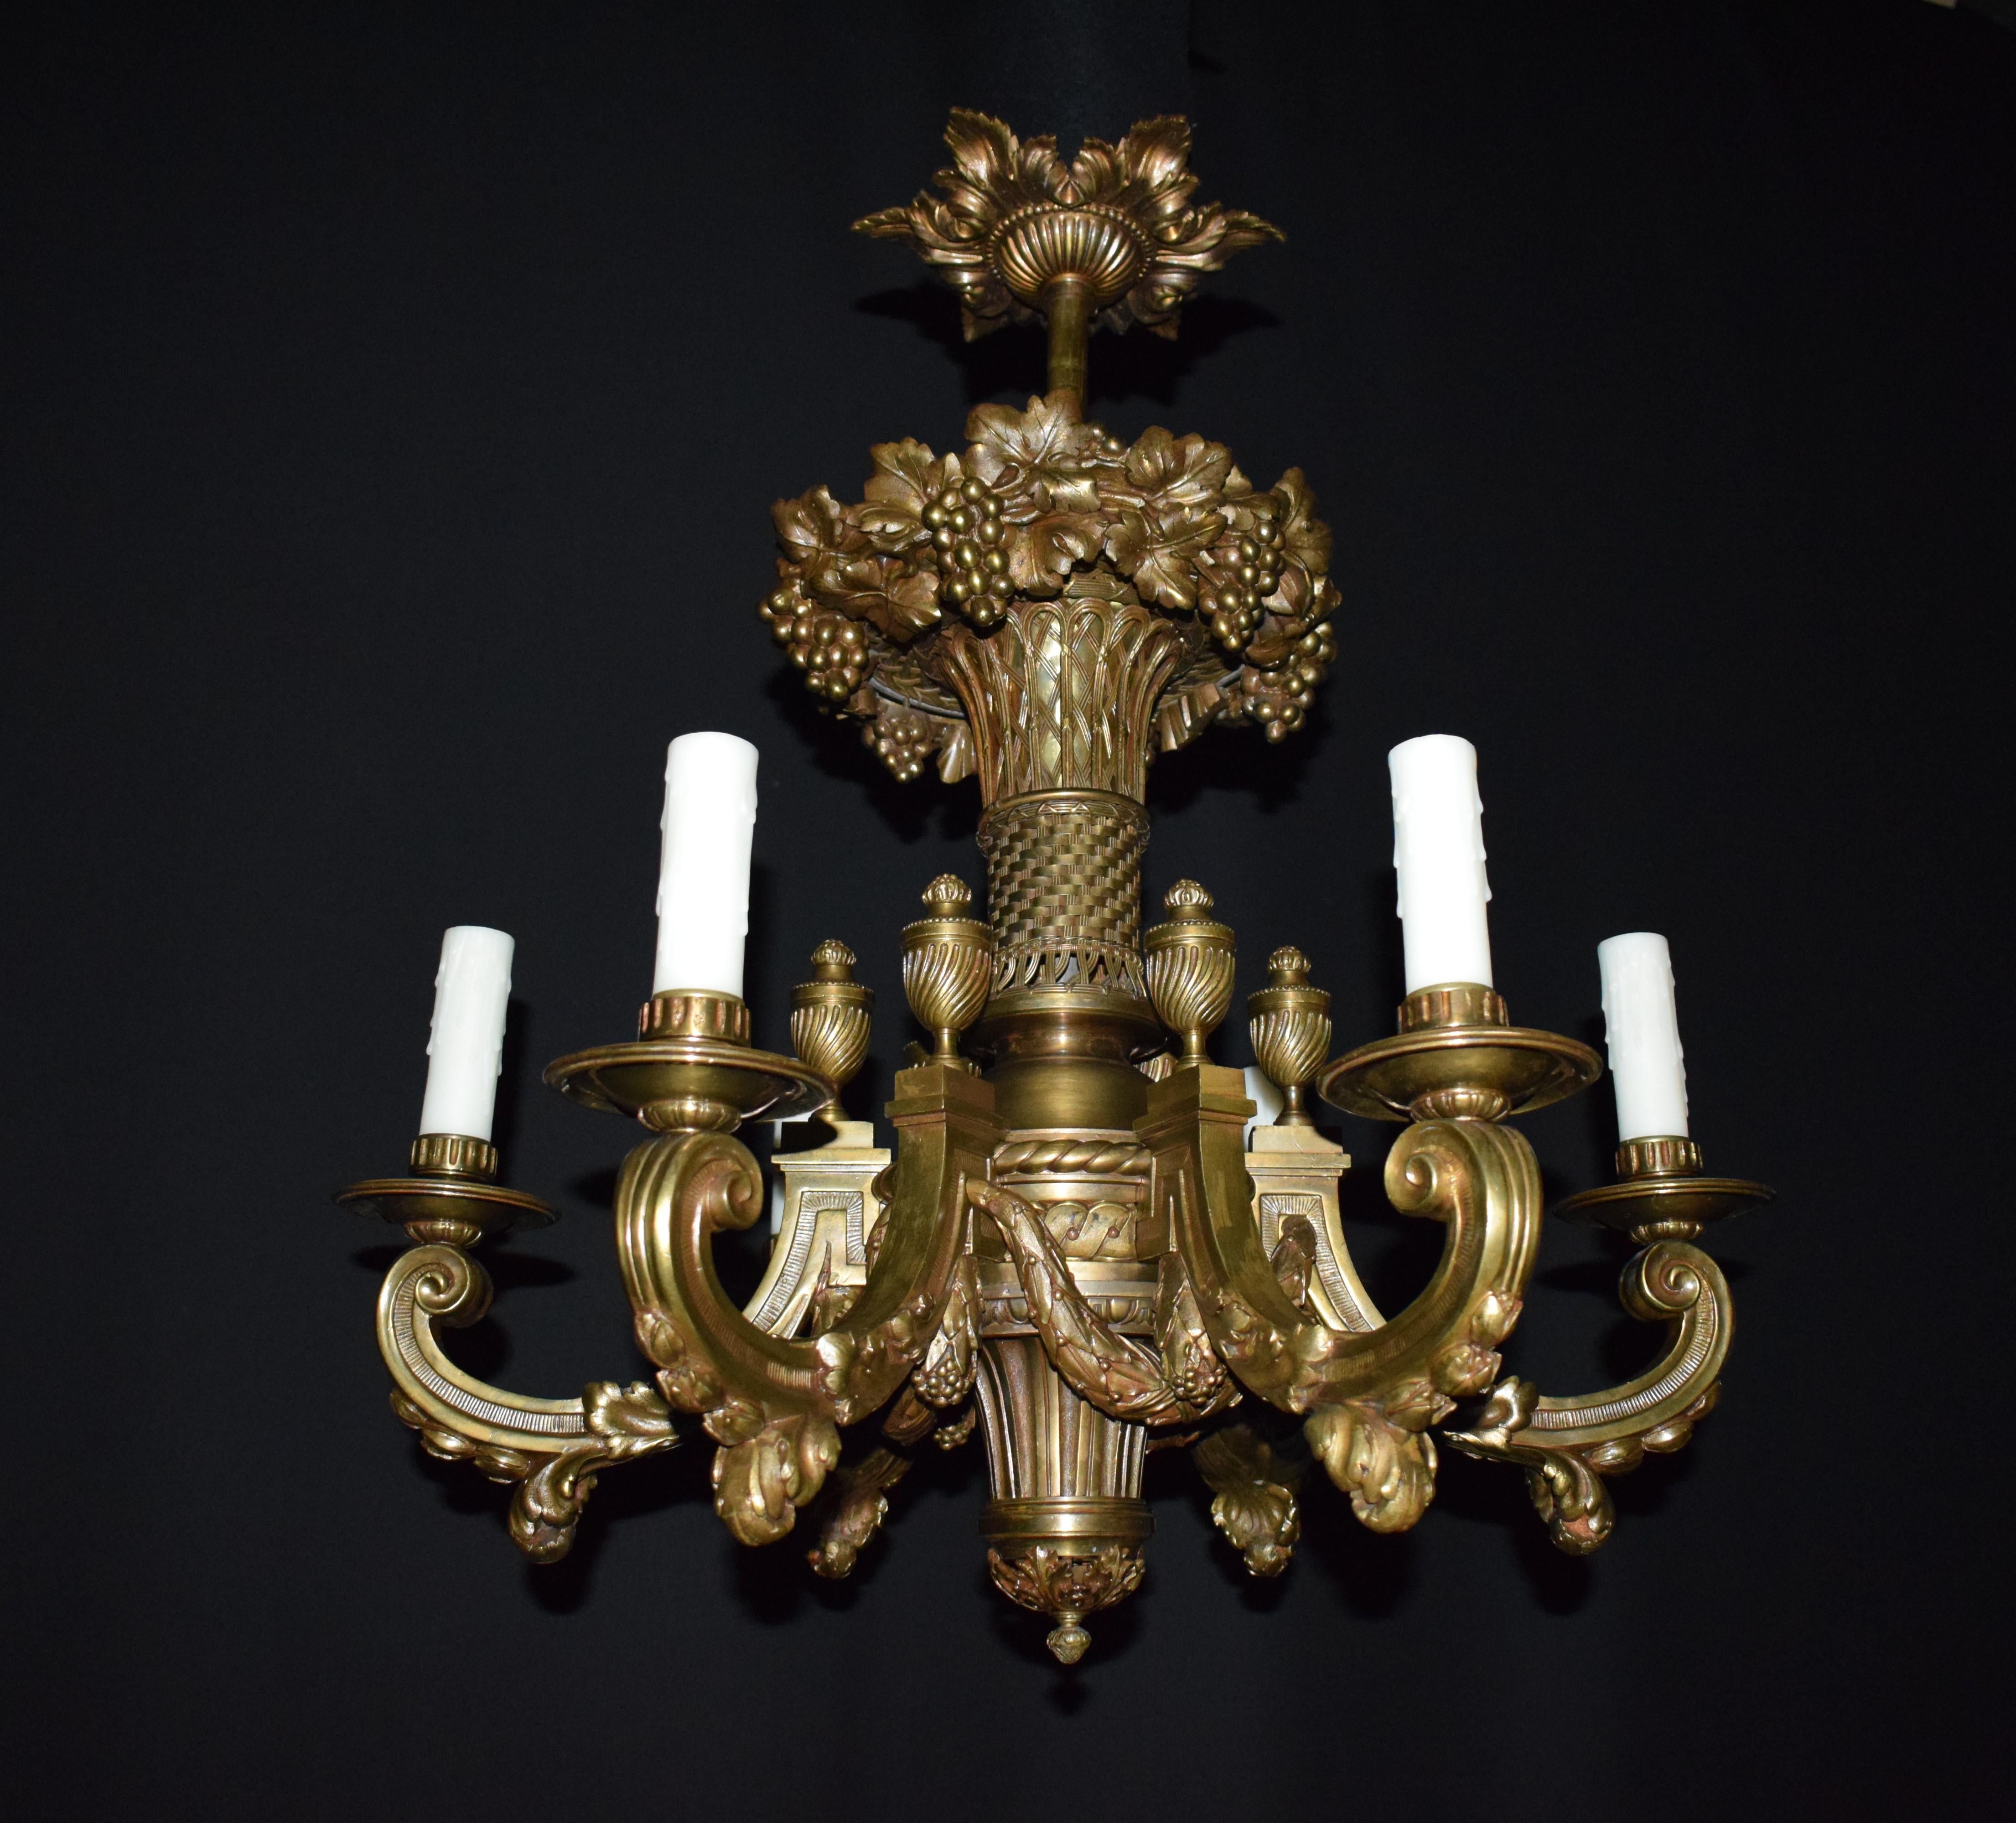 A fine and elegant neoclassical gilt bronze chandelier. 6 Lights. Louis XV style.
France, circa 1900.
Dimensions: Height 29